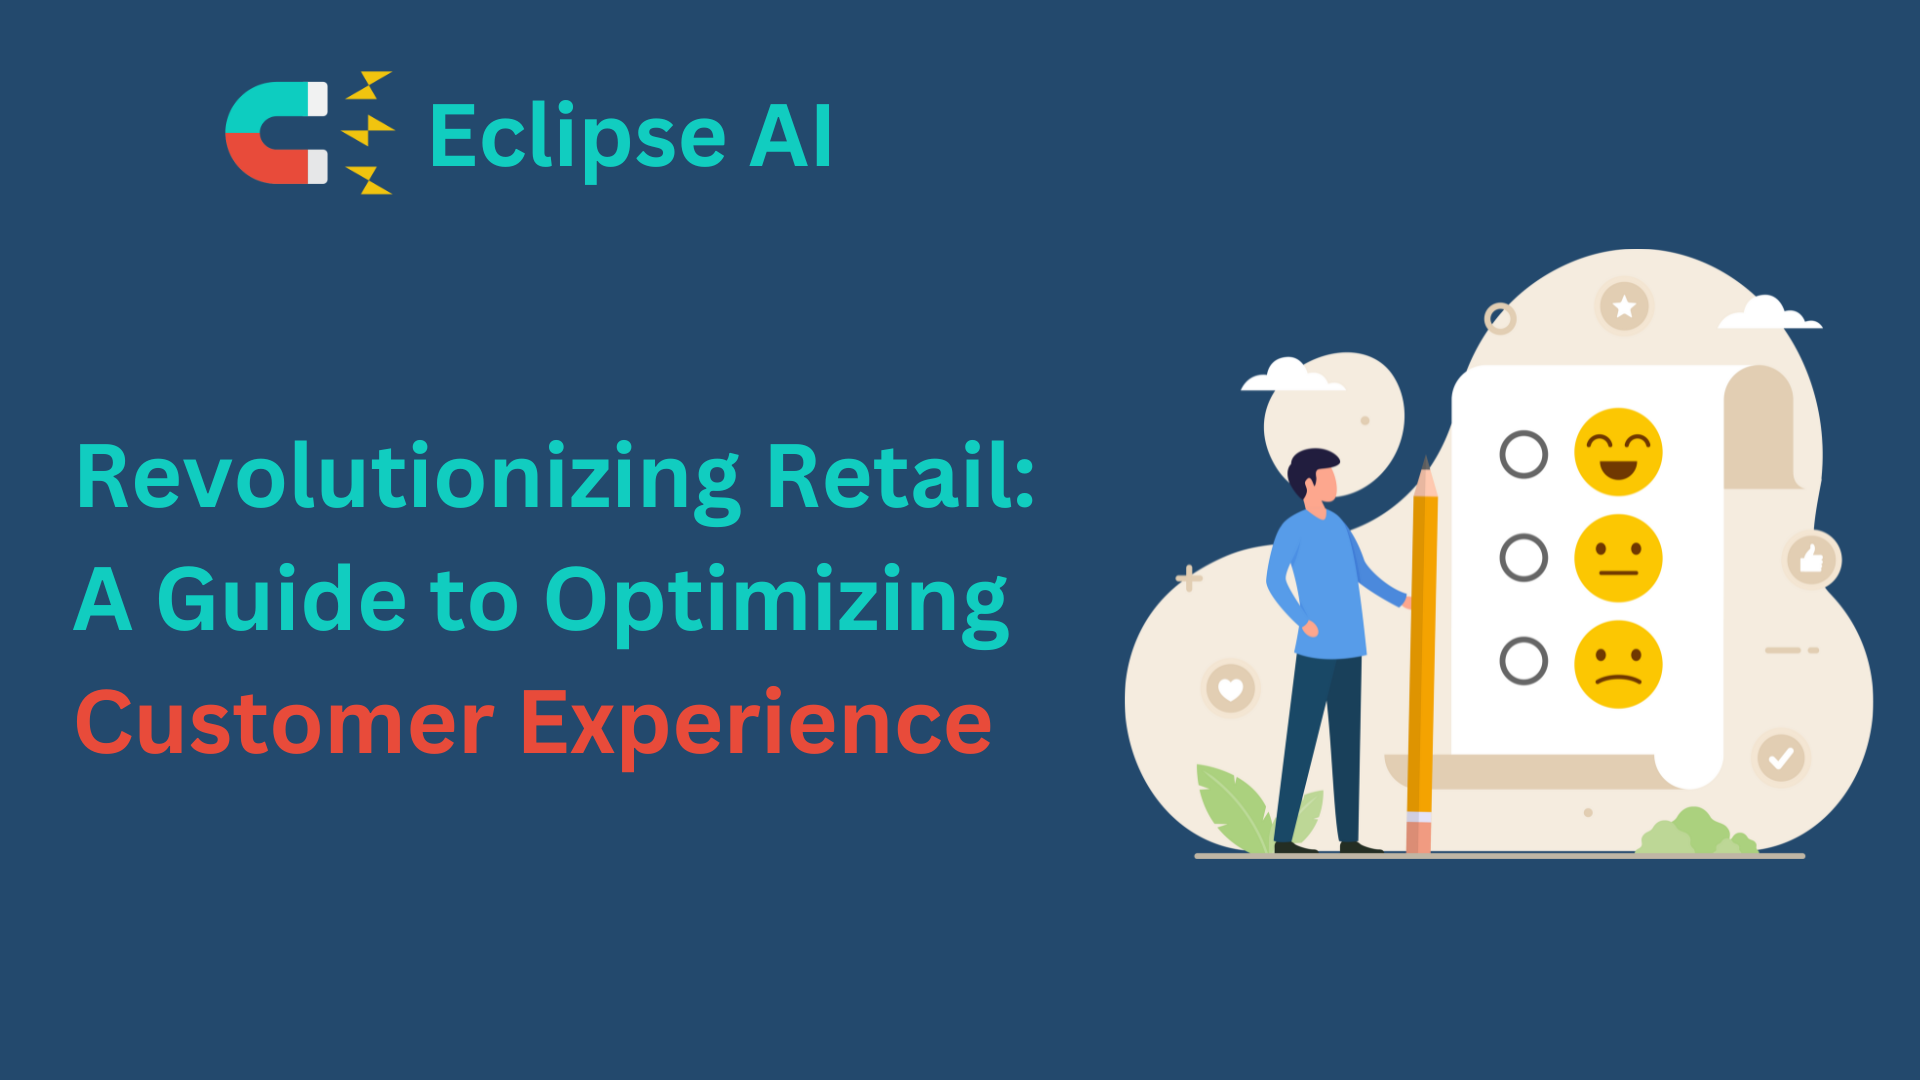 Revolutionizing Retail: A Guide to Optimizing Customer Experience